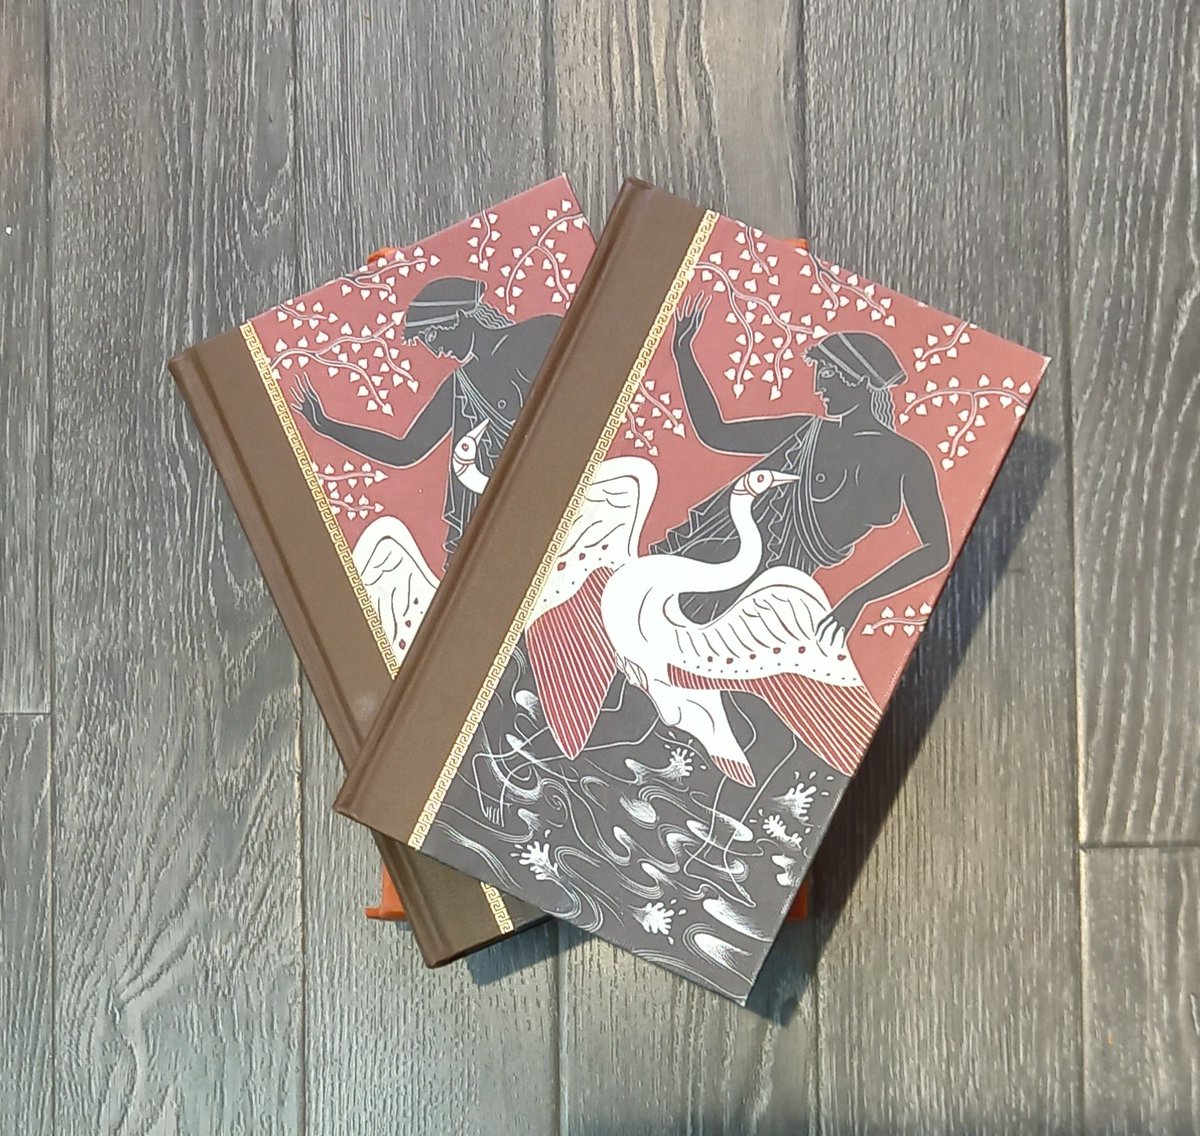 Two volume Folio edition of Greek Myths in a slipcase for £9.99. #GoldstoneBooks #indiebookshop #shoplocal #books #reading #preowned #Folio